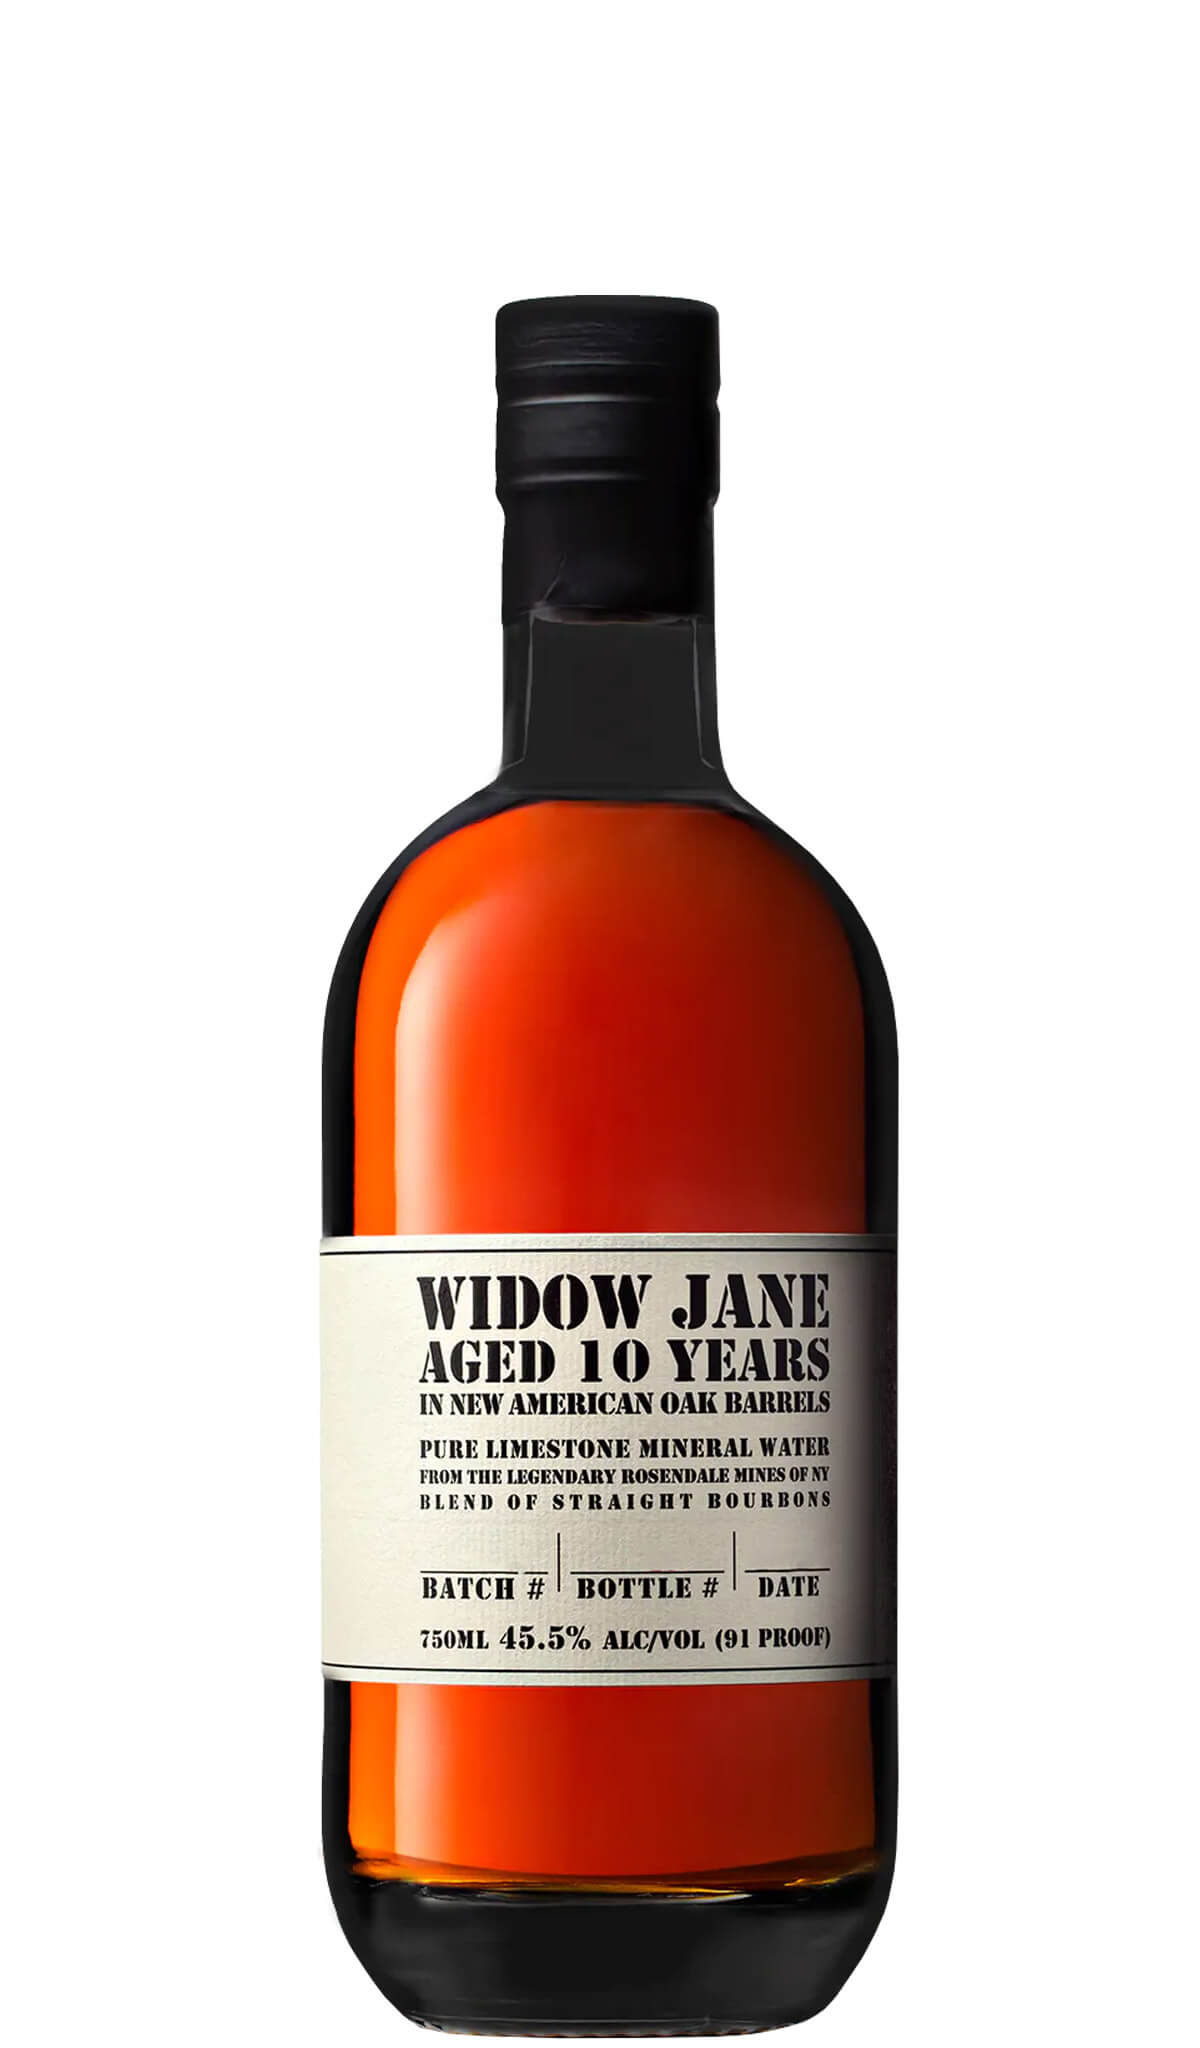 Find out more, explore the range and buy Widow Jane 10 Year Old Bourbon 700mL available online at Wine Sellers Direct - Australia's independent liquor specialists.